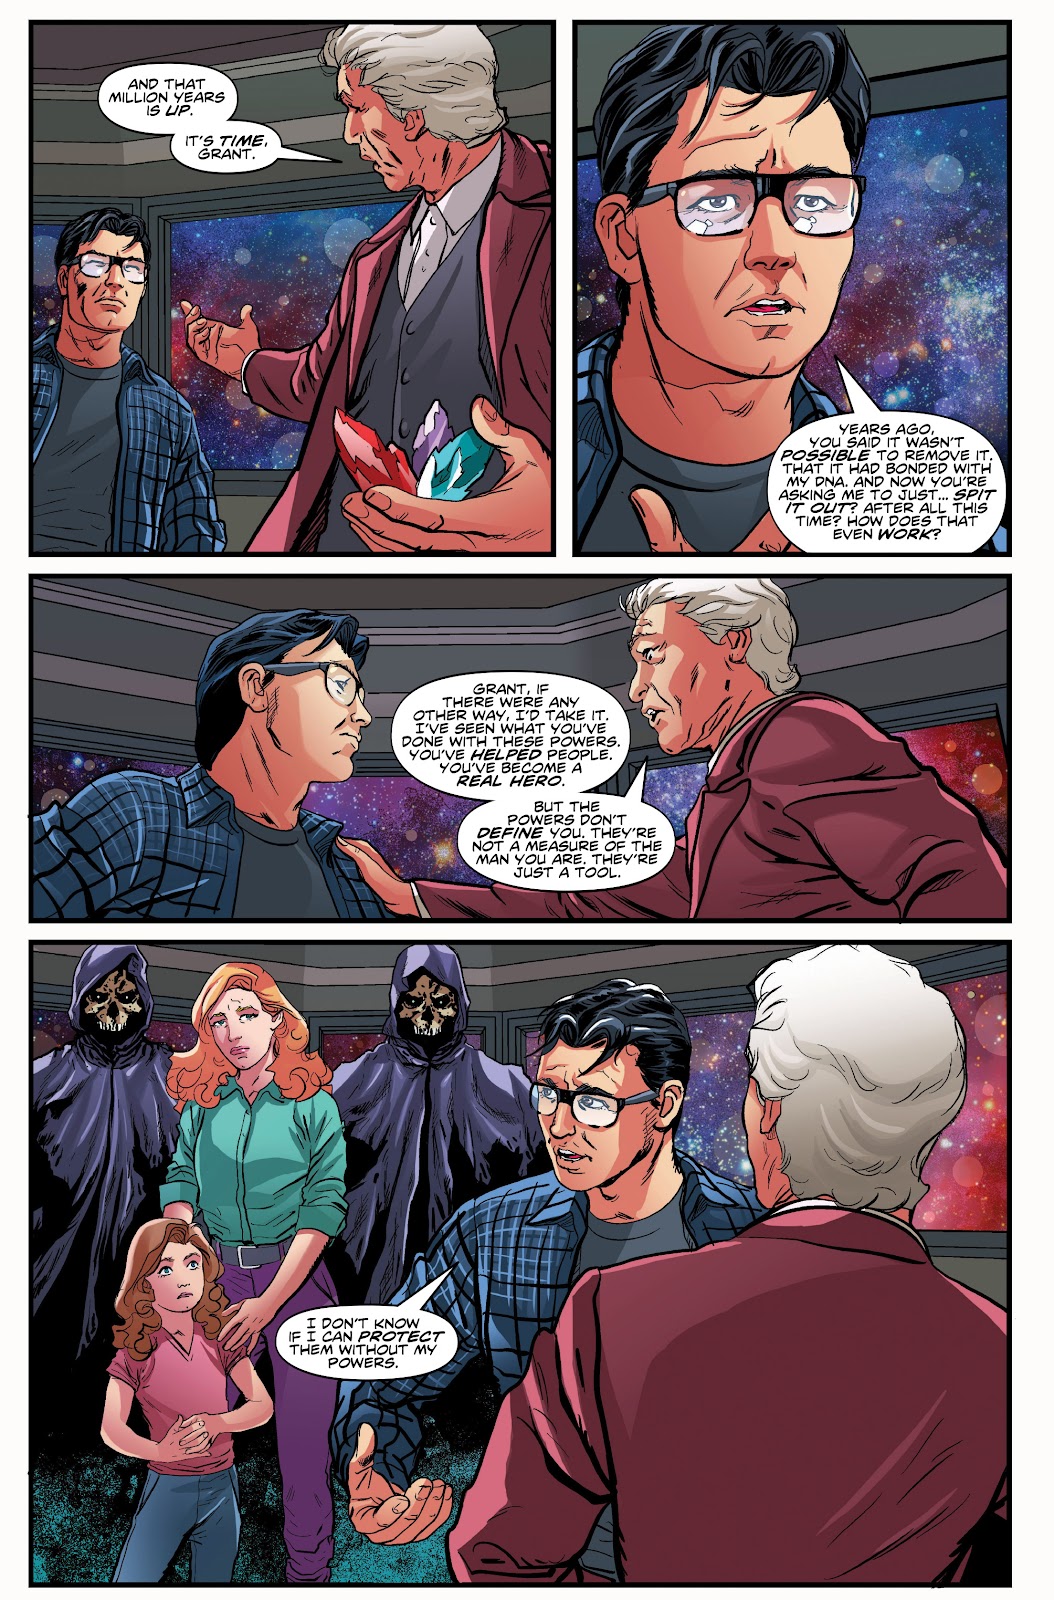 Doctor Who: Ghost Stories issue 8 - Page 6